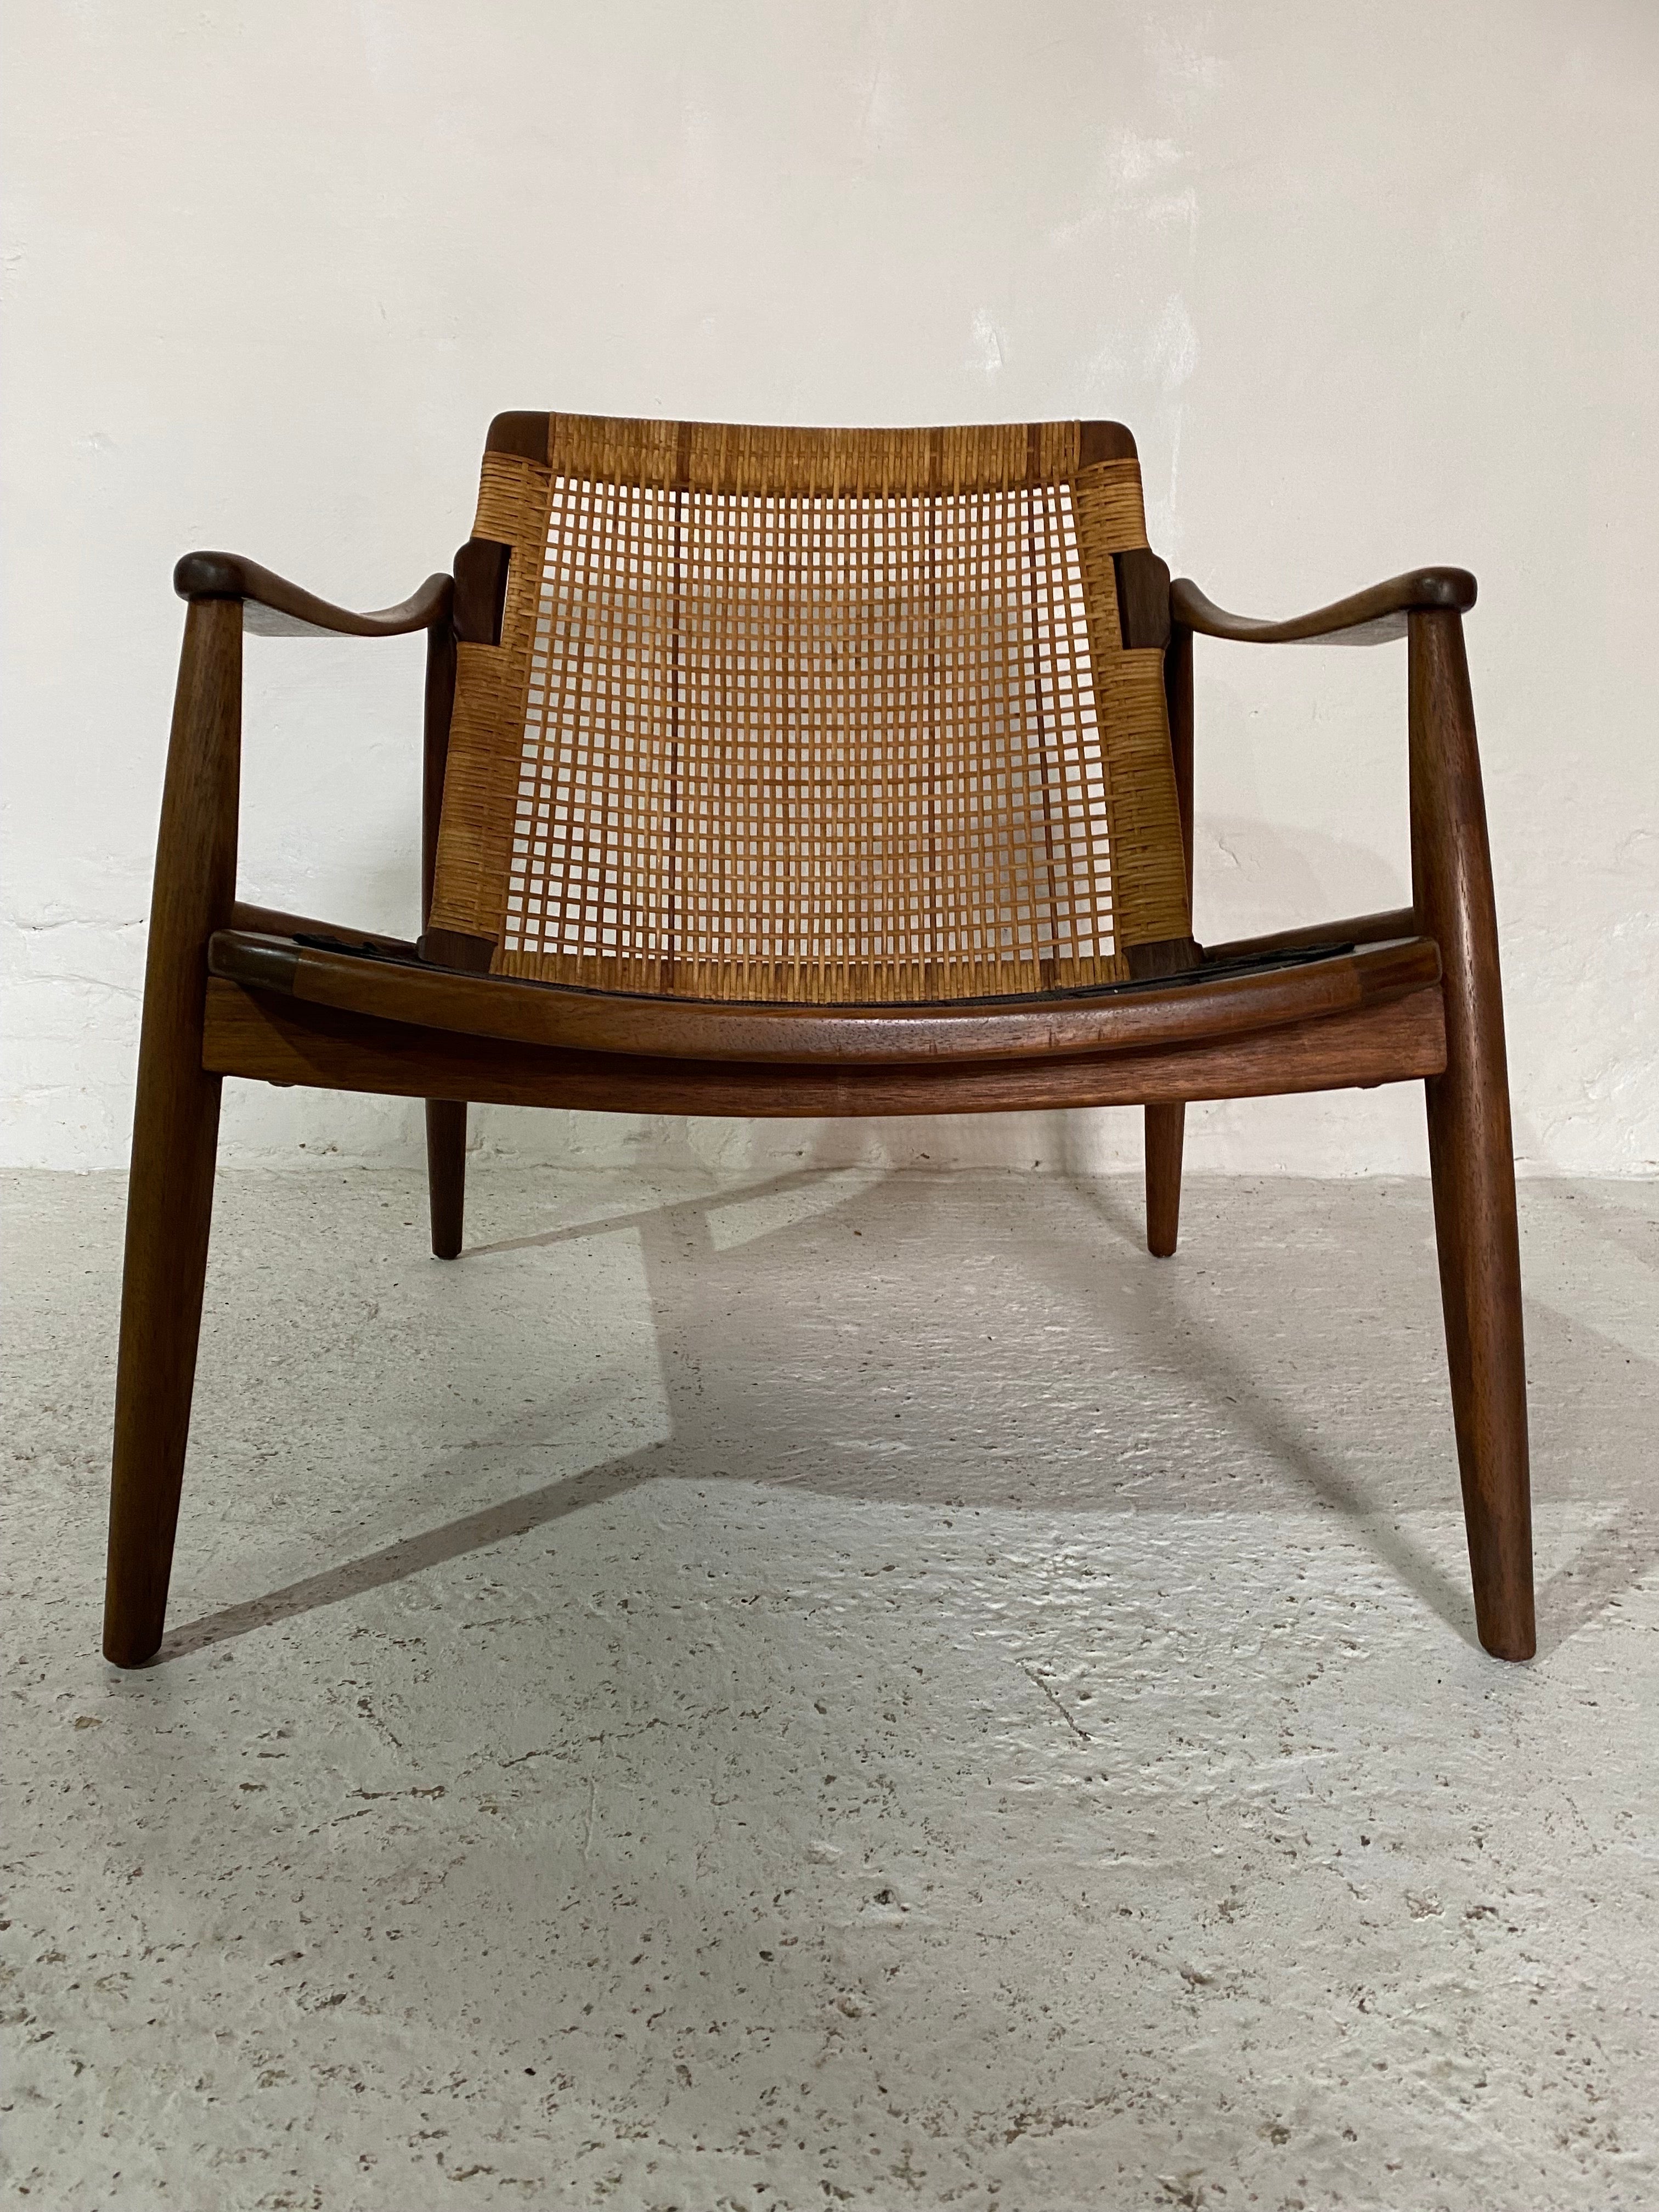 Hand-Crafted Hartmund Lohmeyer set of Two Teak Lounge Chairs, 